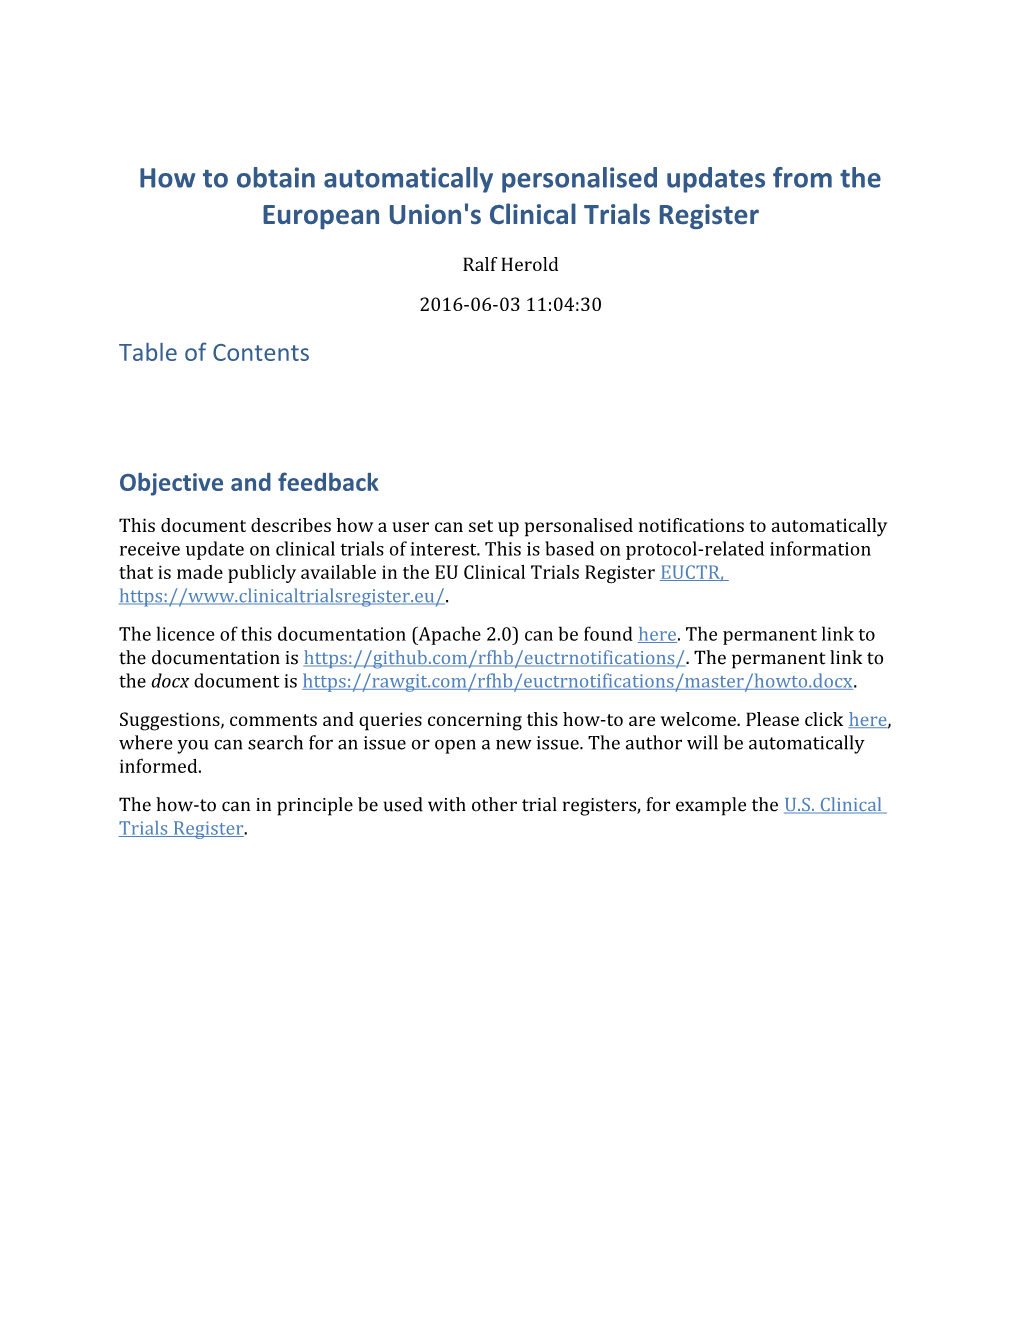 How to Obtain Automatically Personalised Updates from the European Union's Clinical Trials